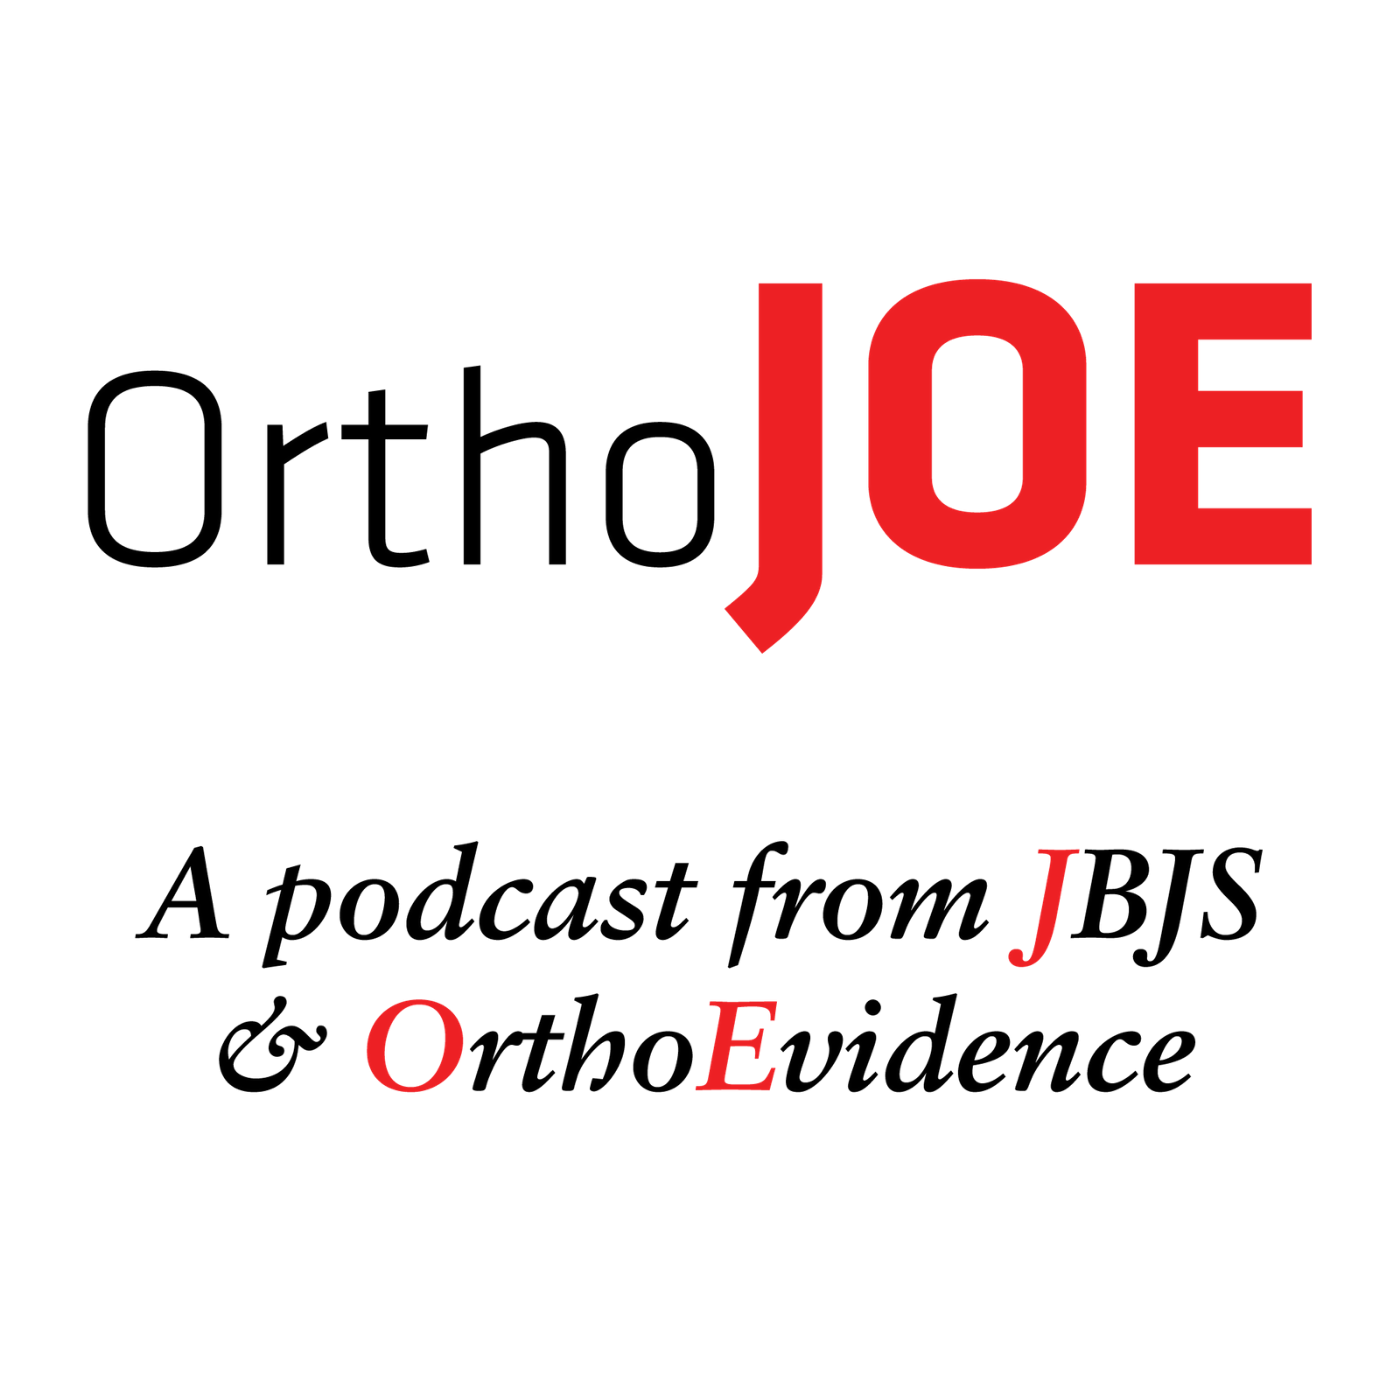 Marc and Mo’s Editor’s Choices for JBJS and OrthoEvidence